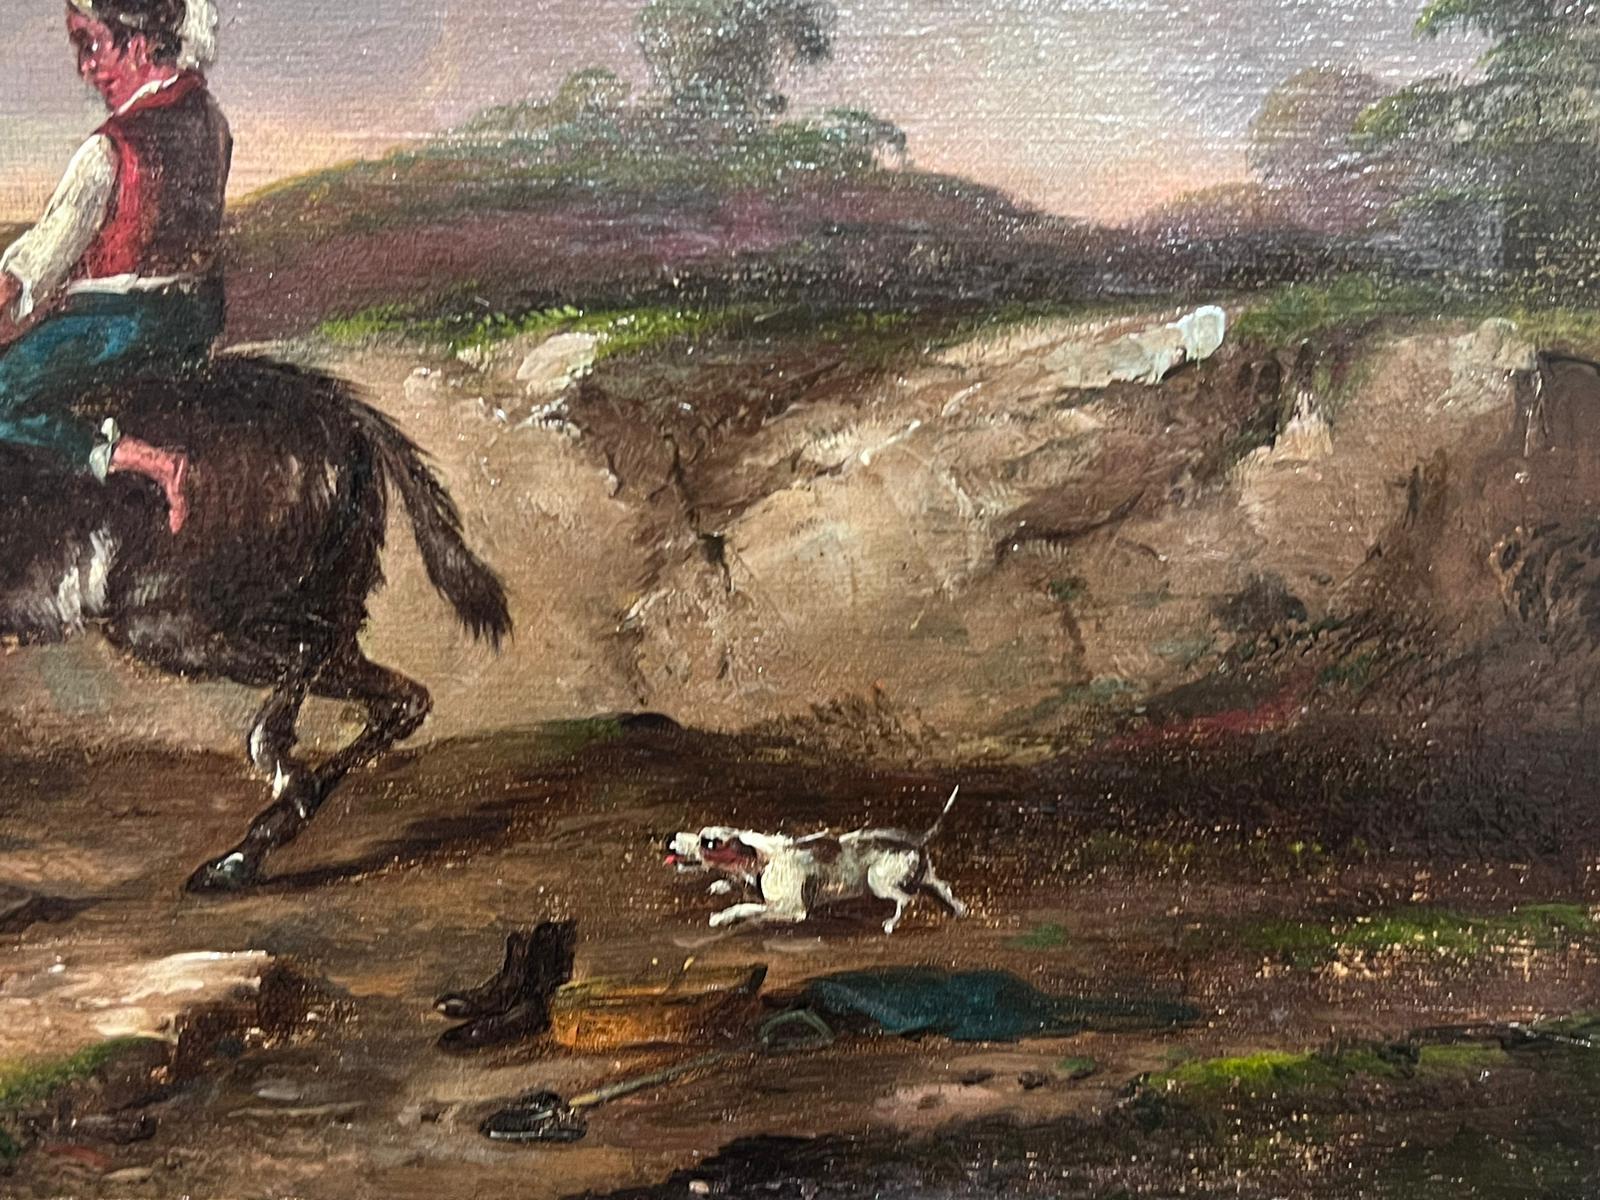 The Stubborn Mule
Italian School, 19th century
oil on canvas, unframed
canvas: 9.75 x 14 inches
provenance: private collection
condition: very good and sound condition, a little scruffy around the edges though this would cover with framing. 